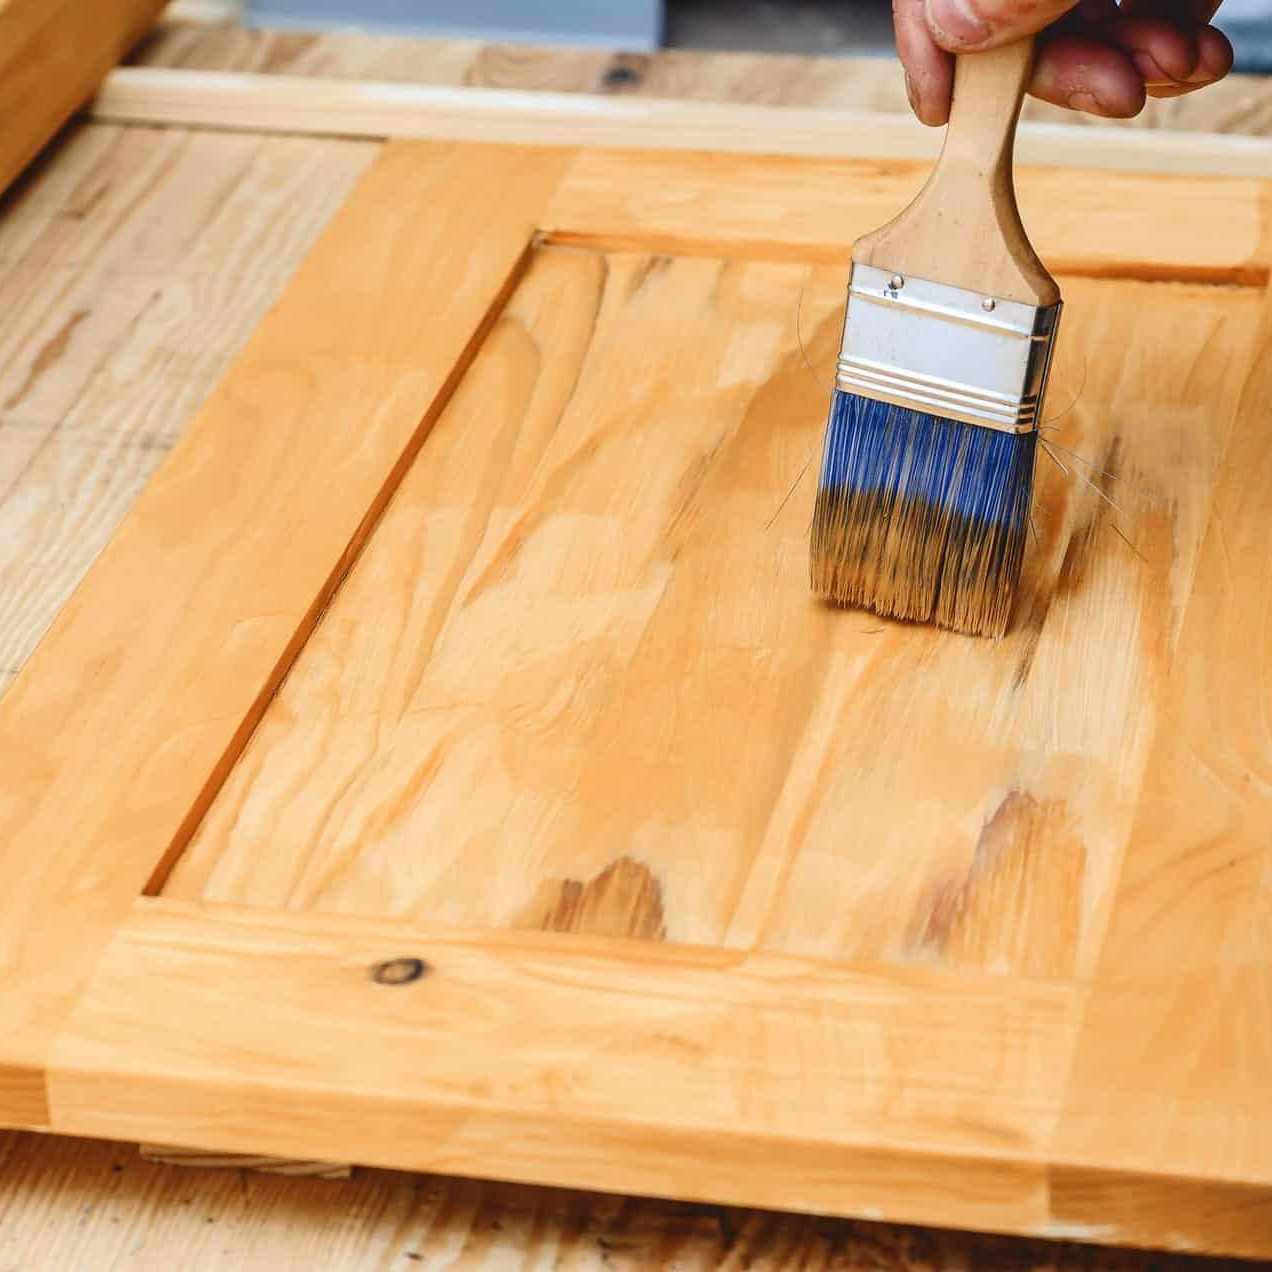 painting-wooden-surface-with-brush